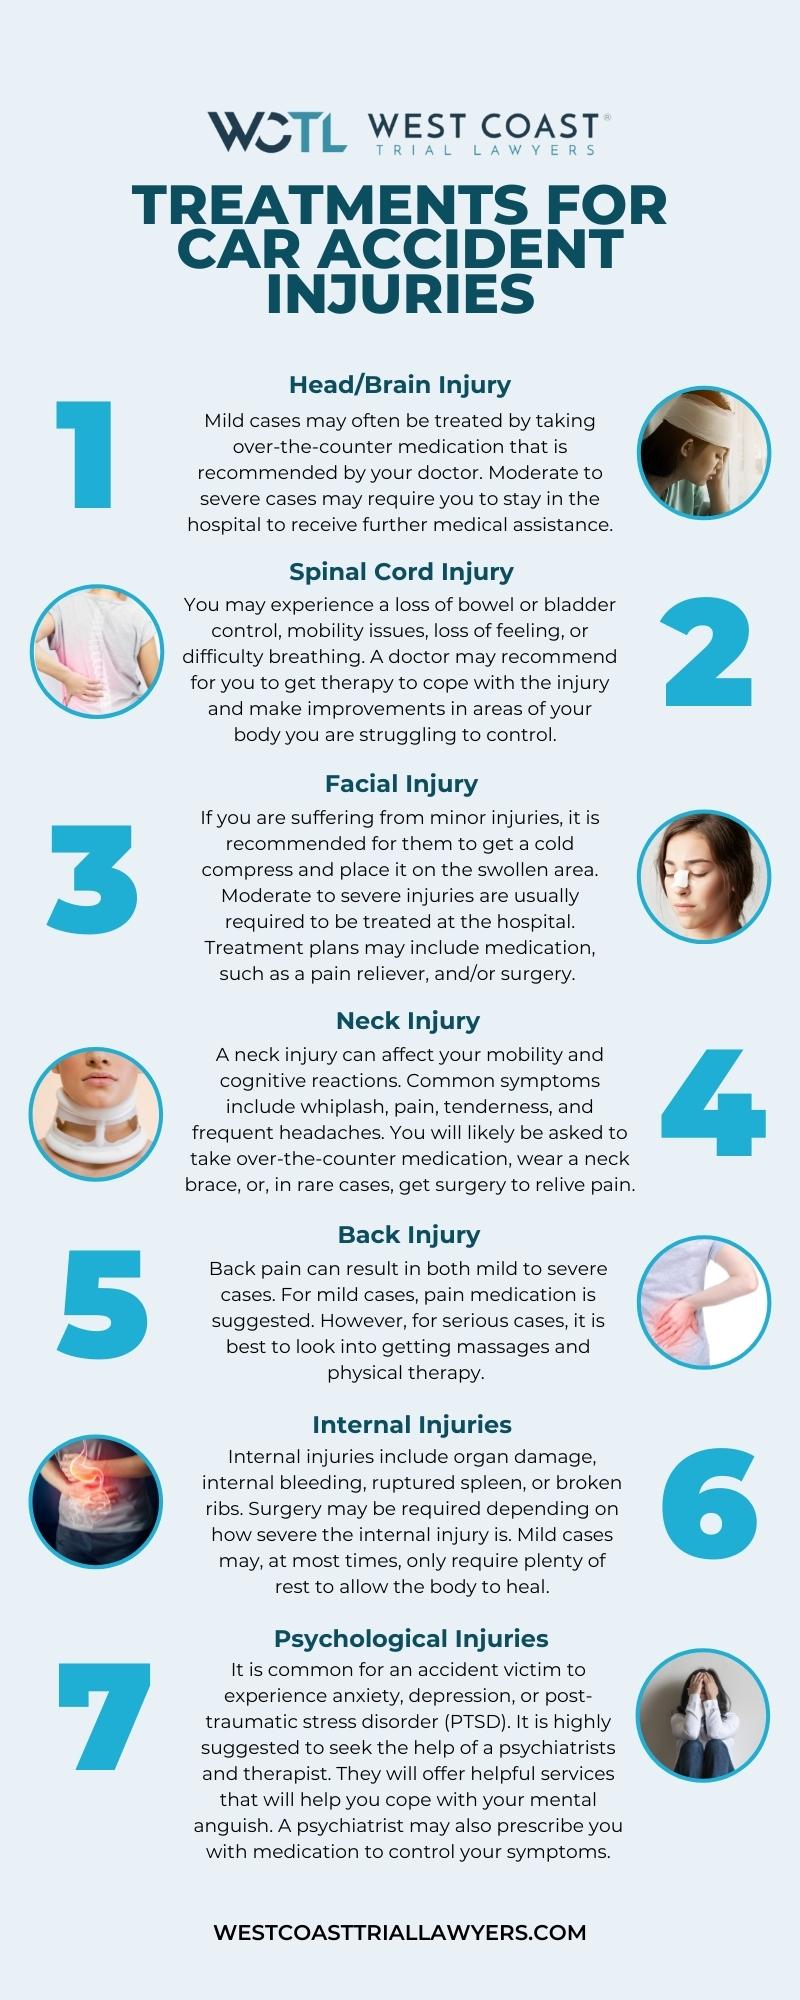 An infographic listing treatments for car accident injuries, including back injury, brain injury, and spinal cord injury.